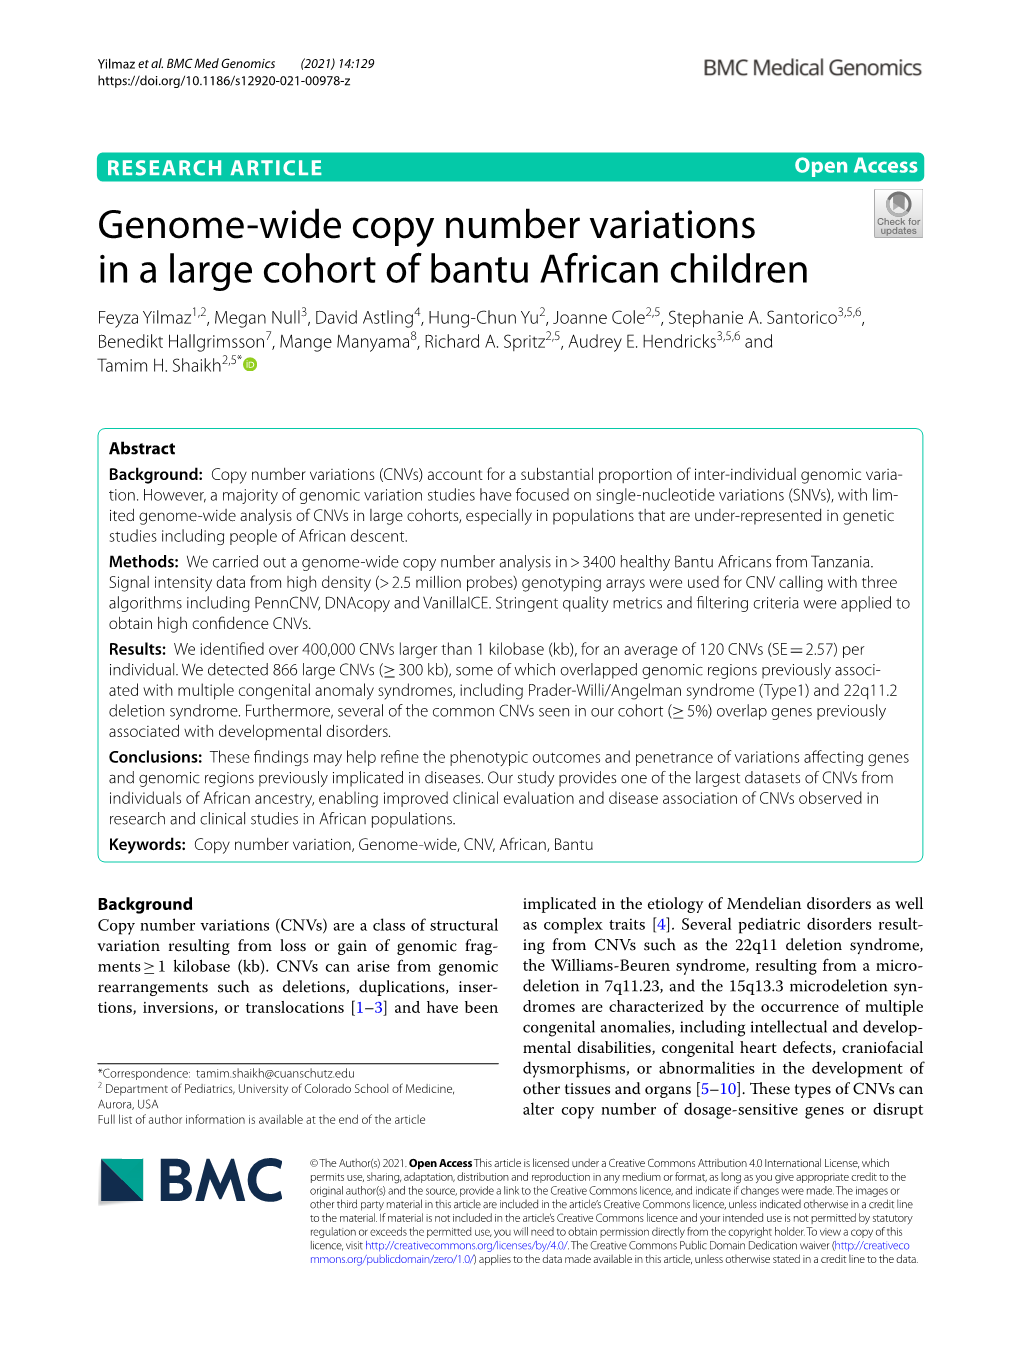 Genome-Wide Copy Number Variations in a Large Cohort of Bantu African